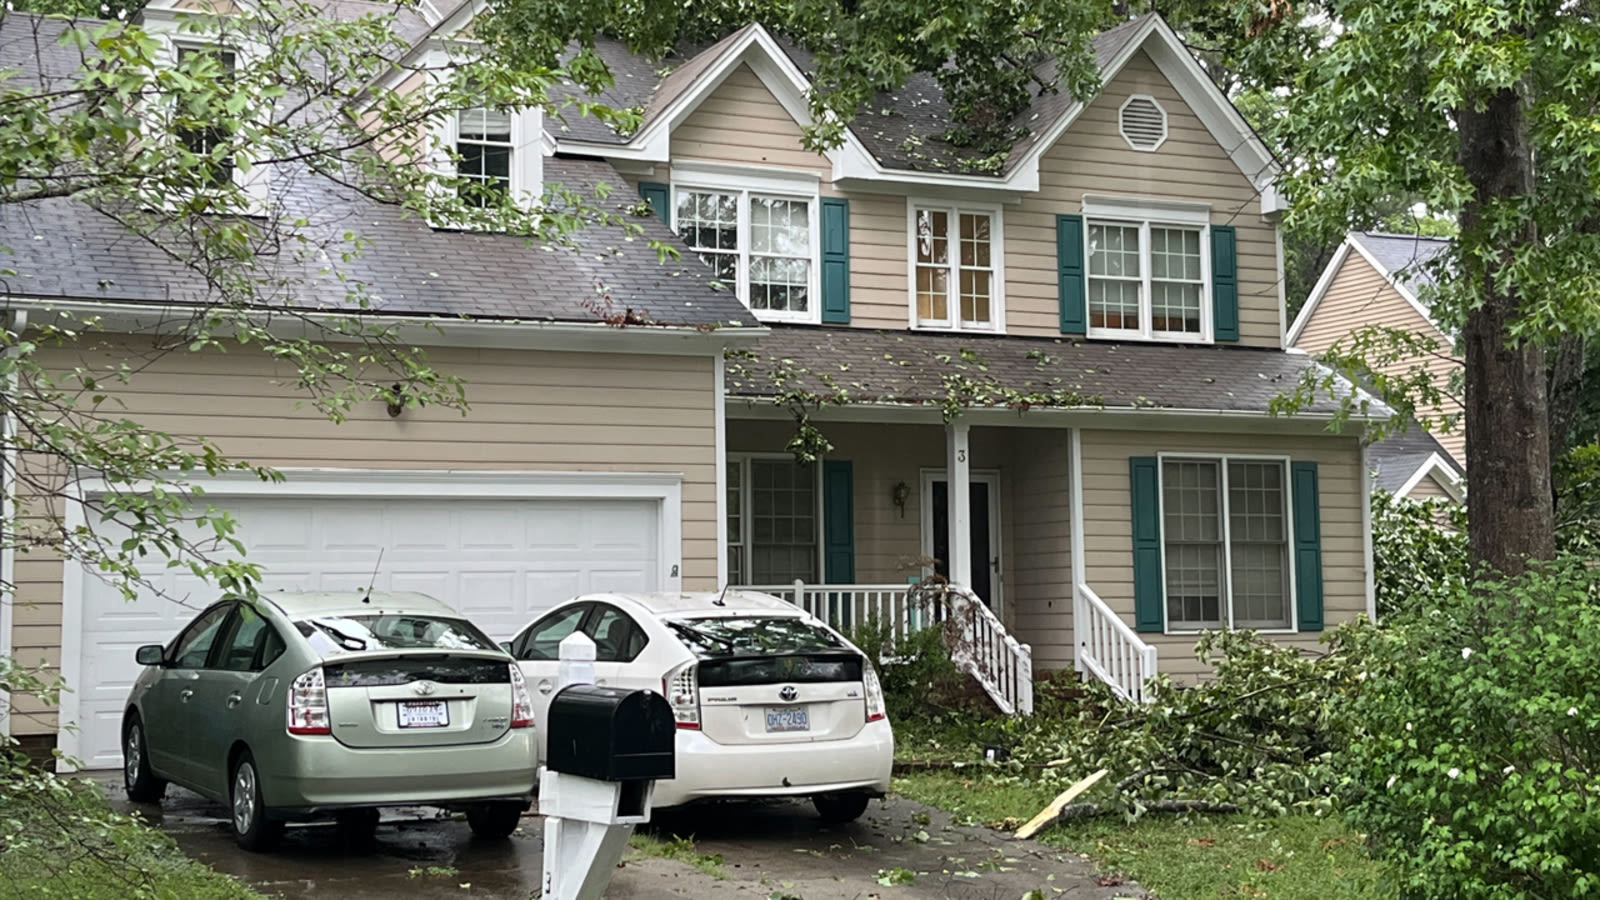 Severe storms knock out power to thousands of people across central North Carolina